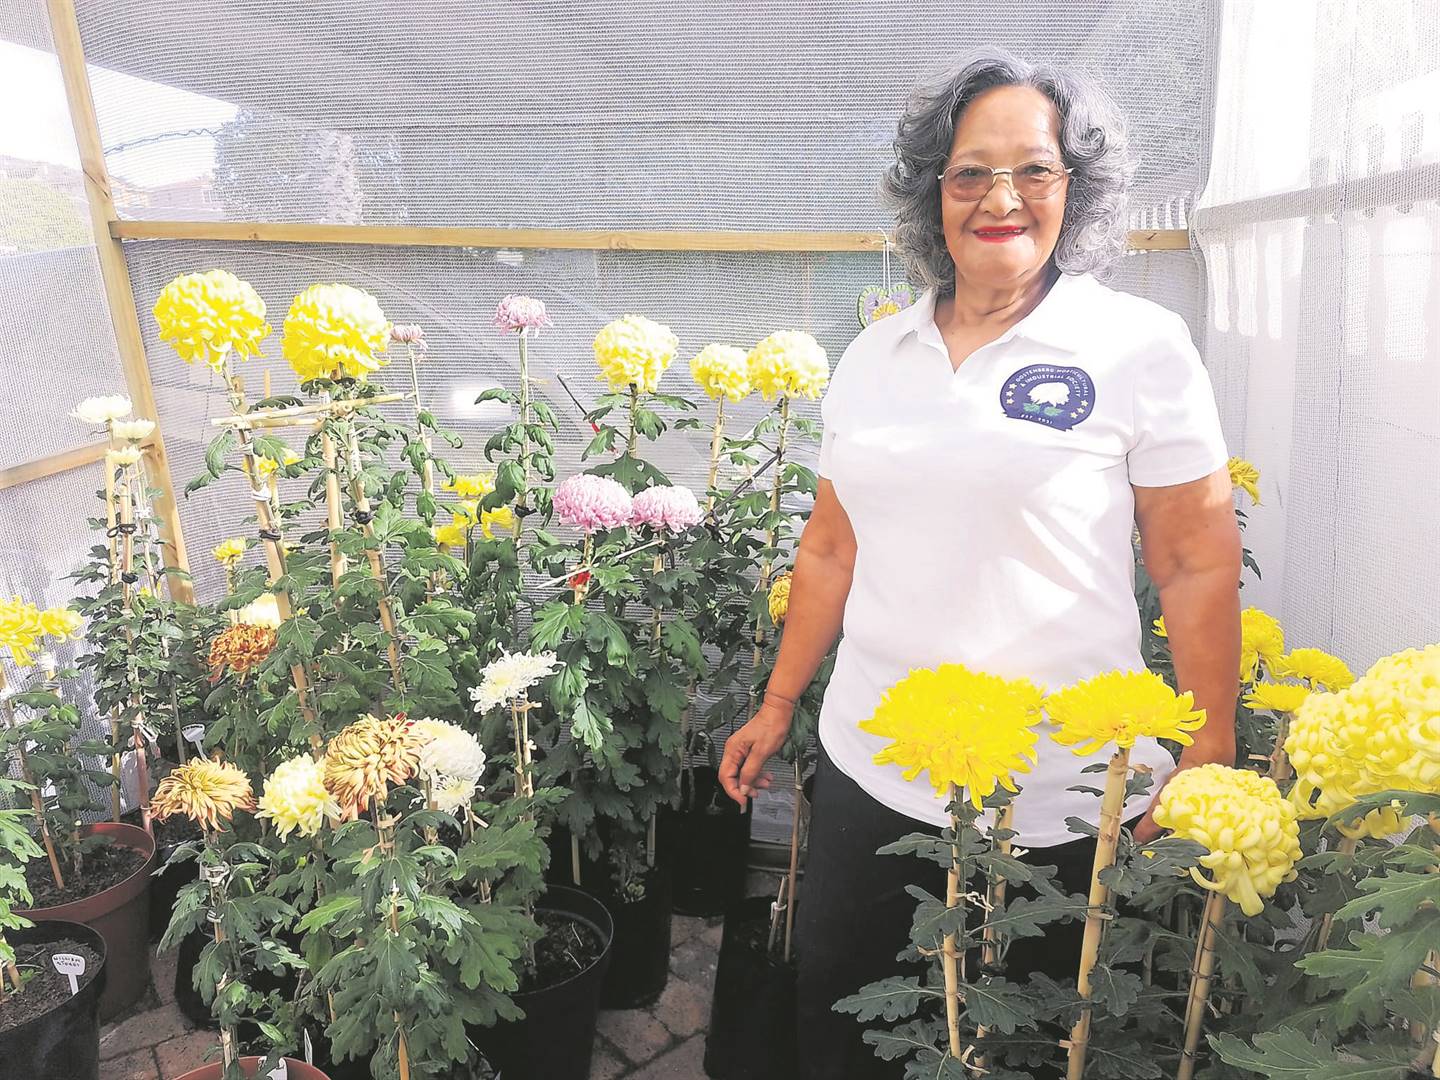 Melinda Woodward (78) with the chrysanthemums that are going on display at the chrysanthemum flower show on Saturday 29 April. PHOTO: Natasha Bezuidenhout